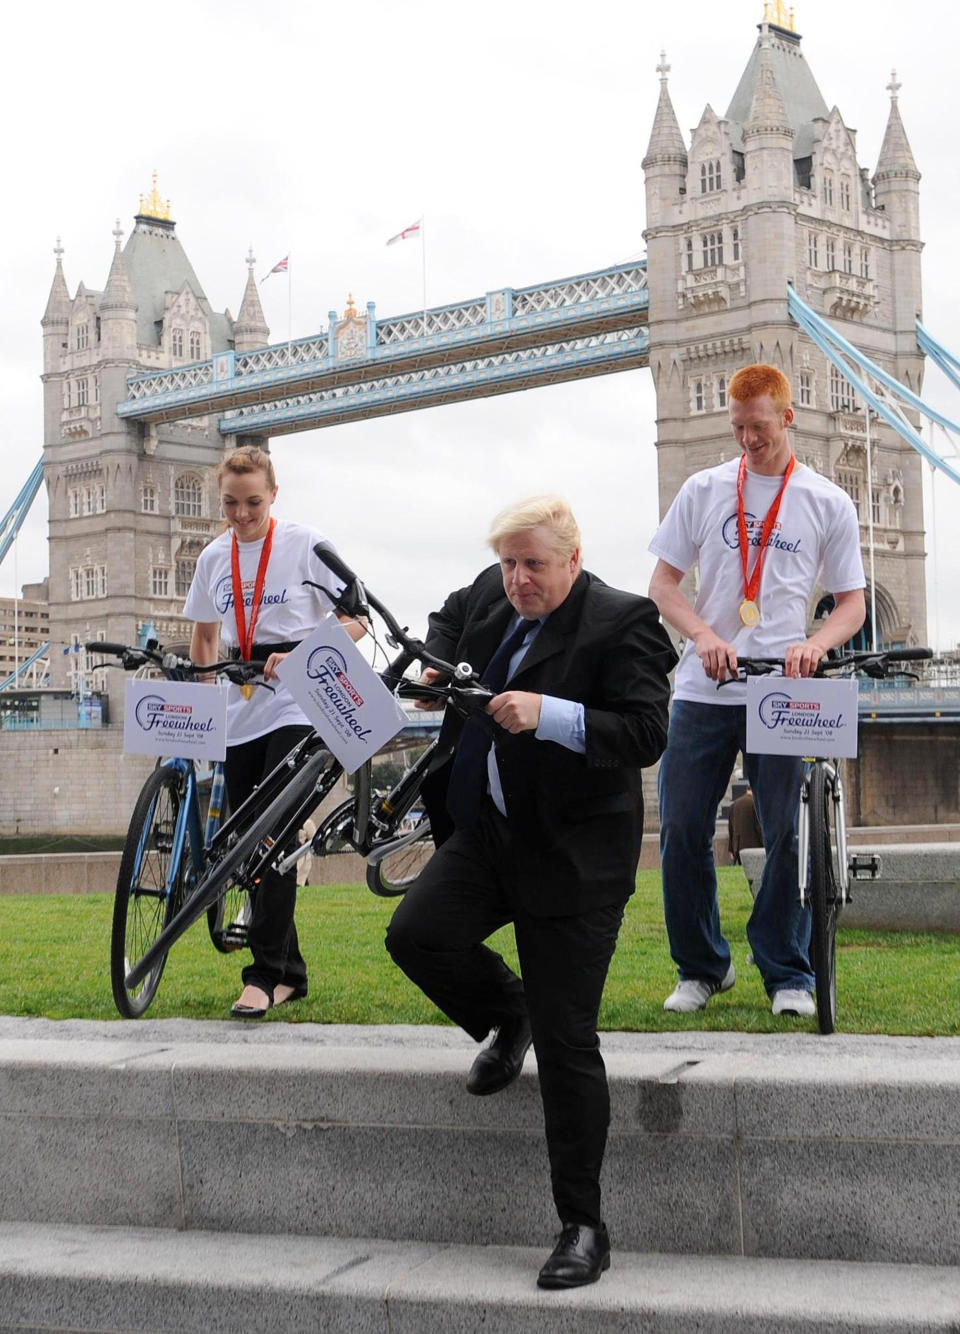 London Mayor Boris Johnson attends a photocall with Olympic Gold medal cyclists Victoria Pendleton and Ed Clancy to encourage Londoners to sign up for the Sky Sports London Freewheel event on September 21st. 